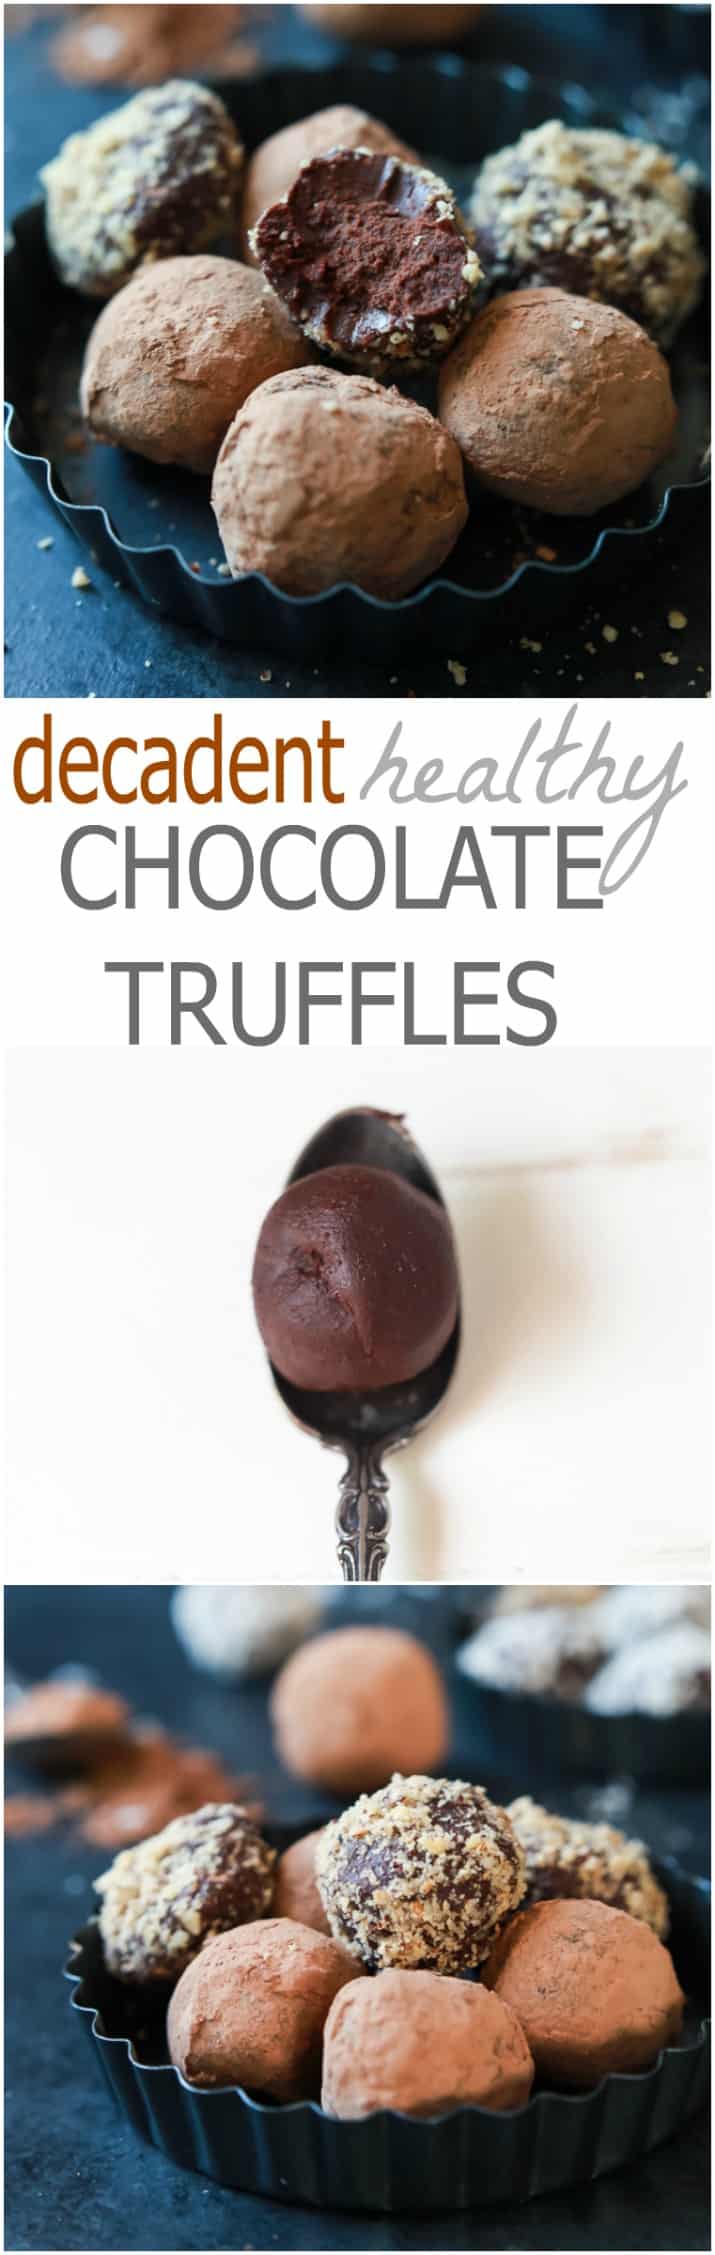 Recipe collage for Decadent Healthy Chocolate Truffles